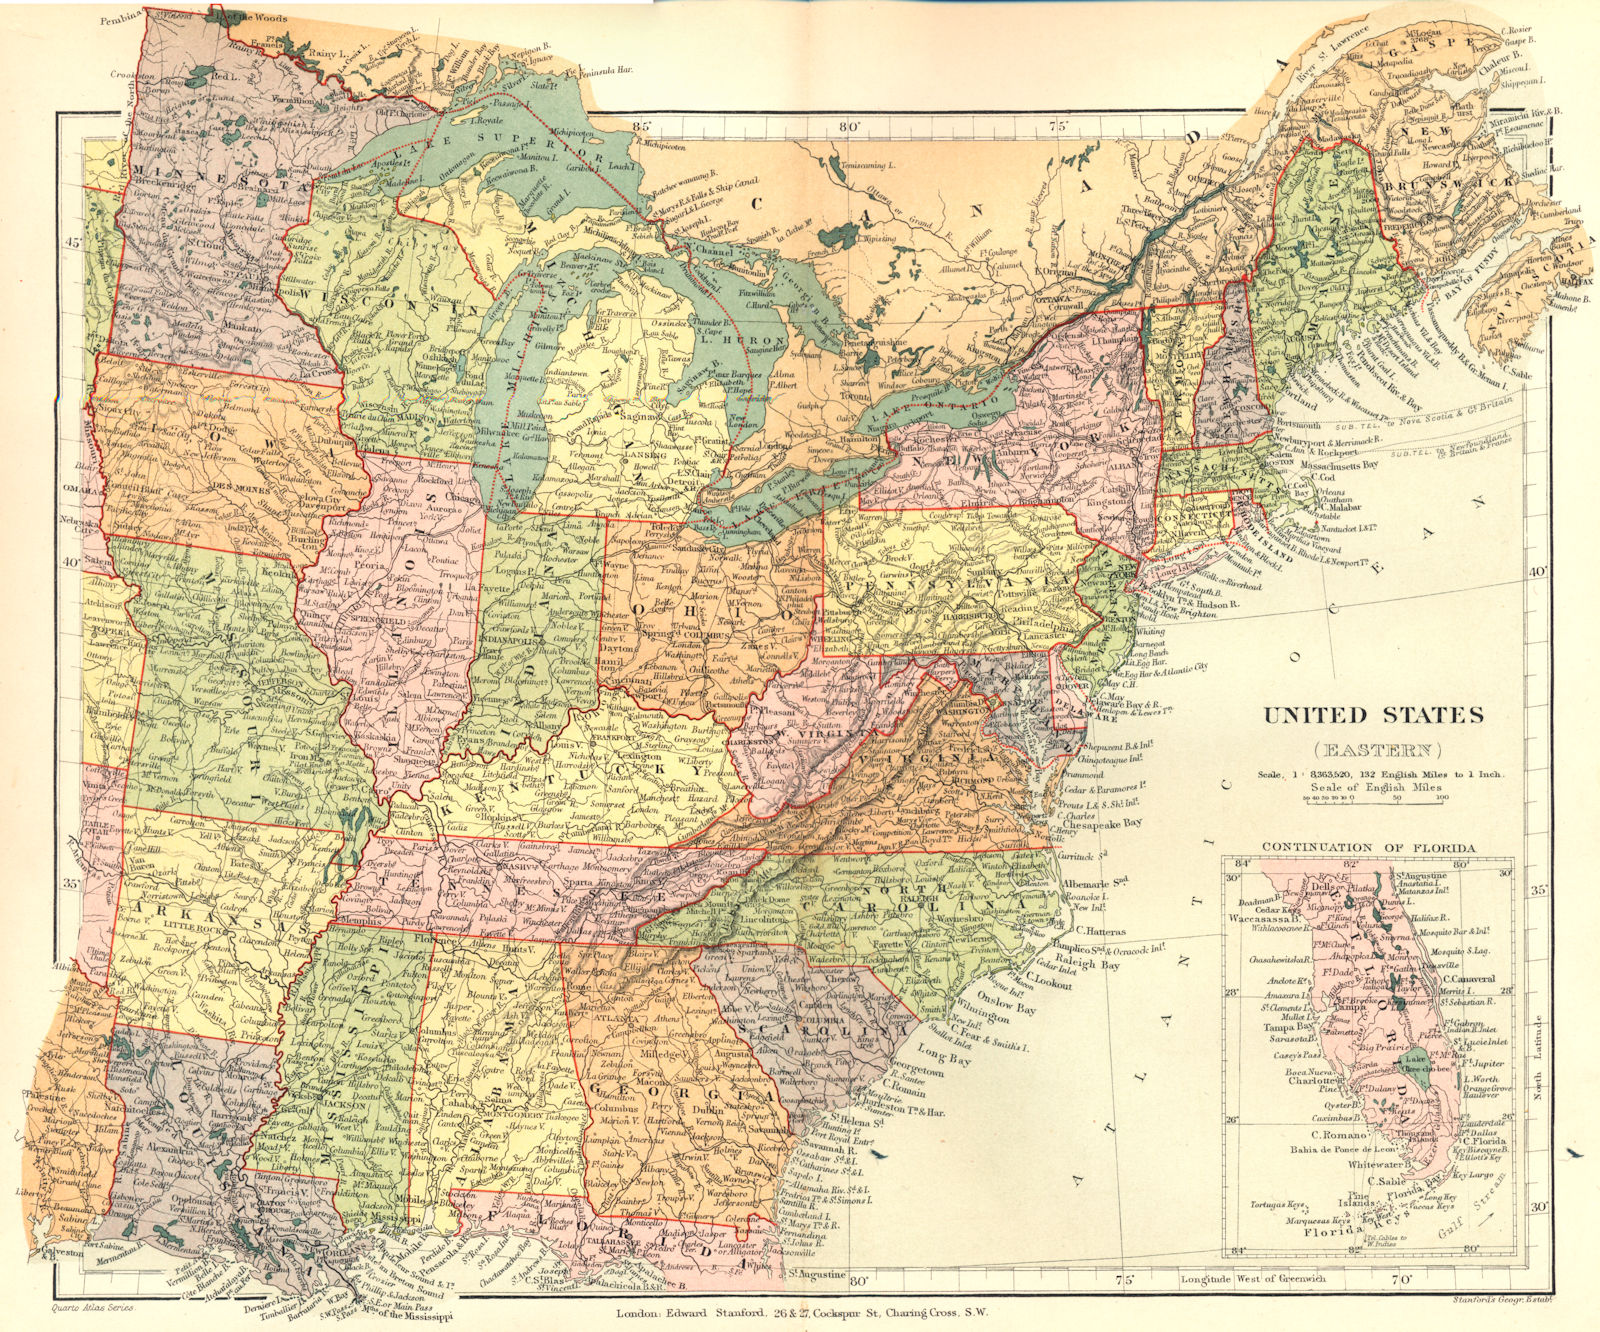 Associate Product USA. United States (Eastern) ; Inset Florida. Stanford 1892 old antique map